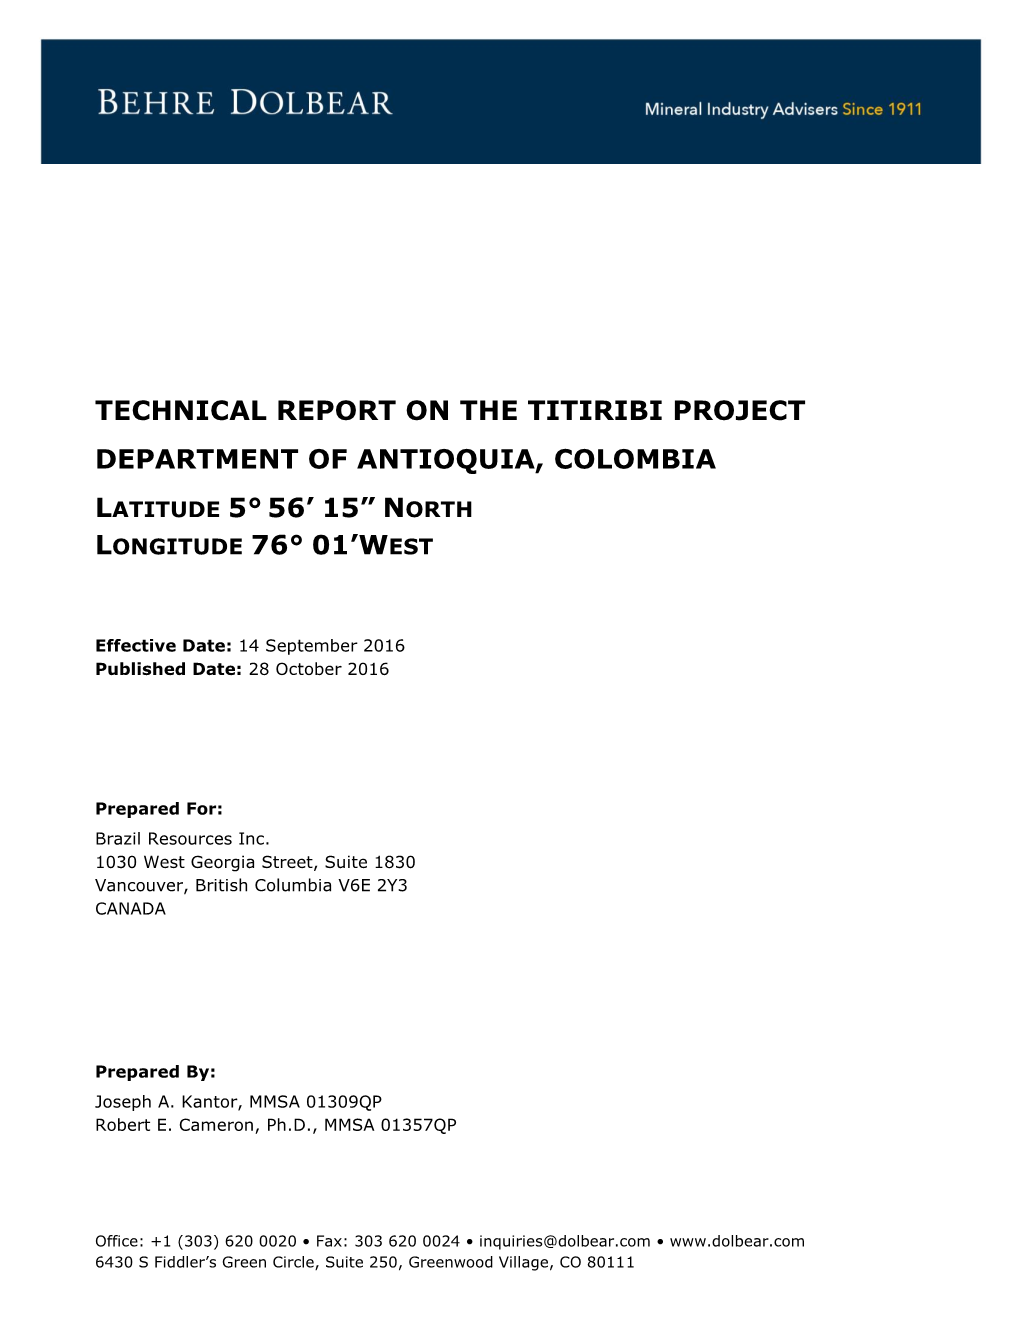 Technical Report on the Titiribi Project Department of Antioquia, Colombia